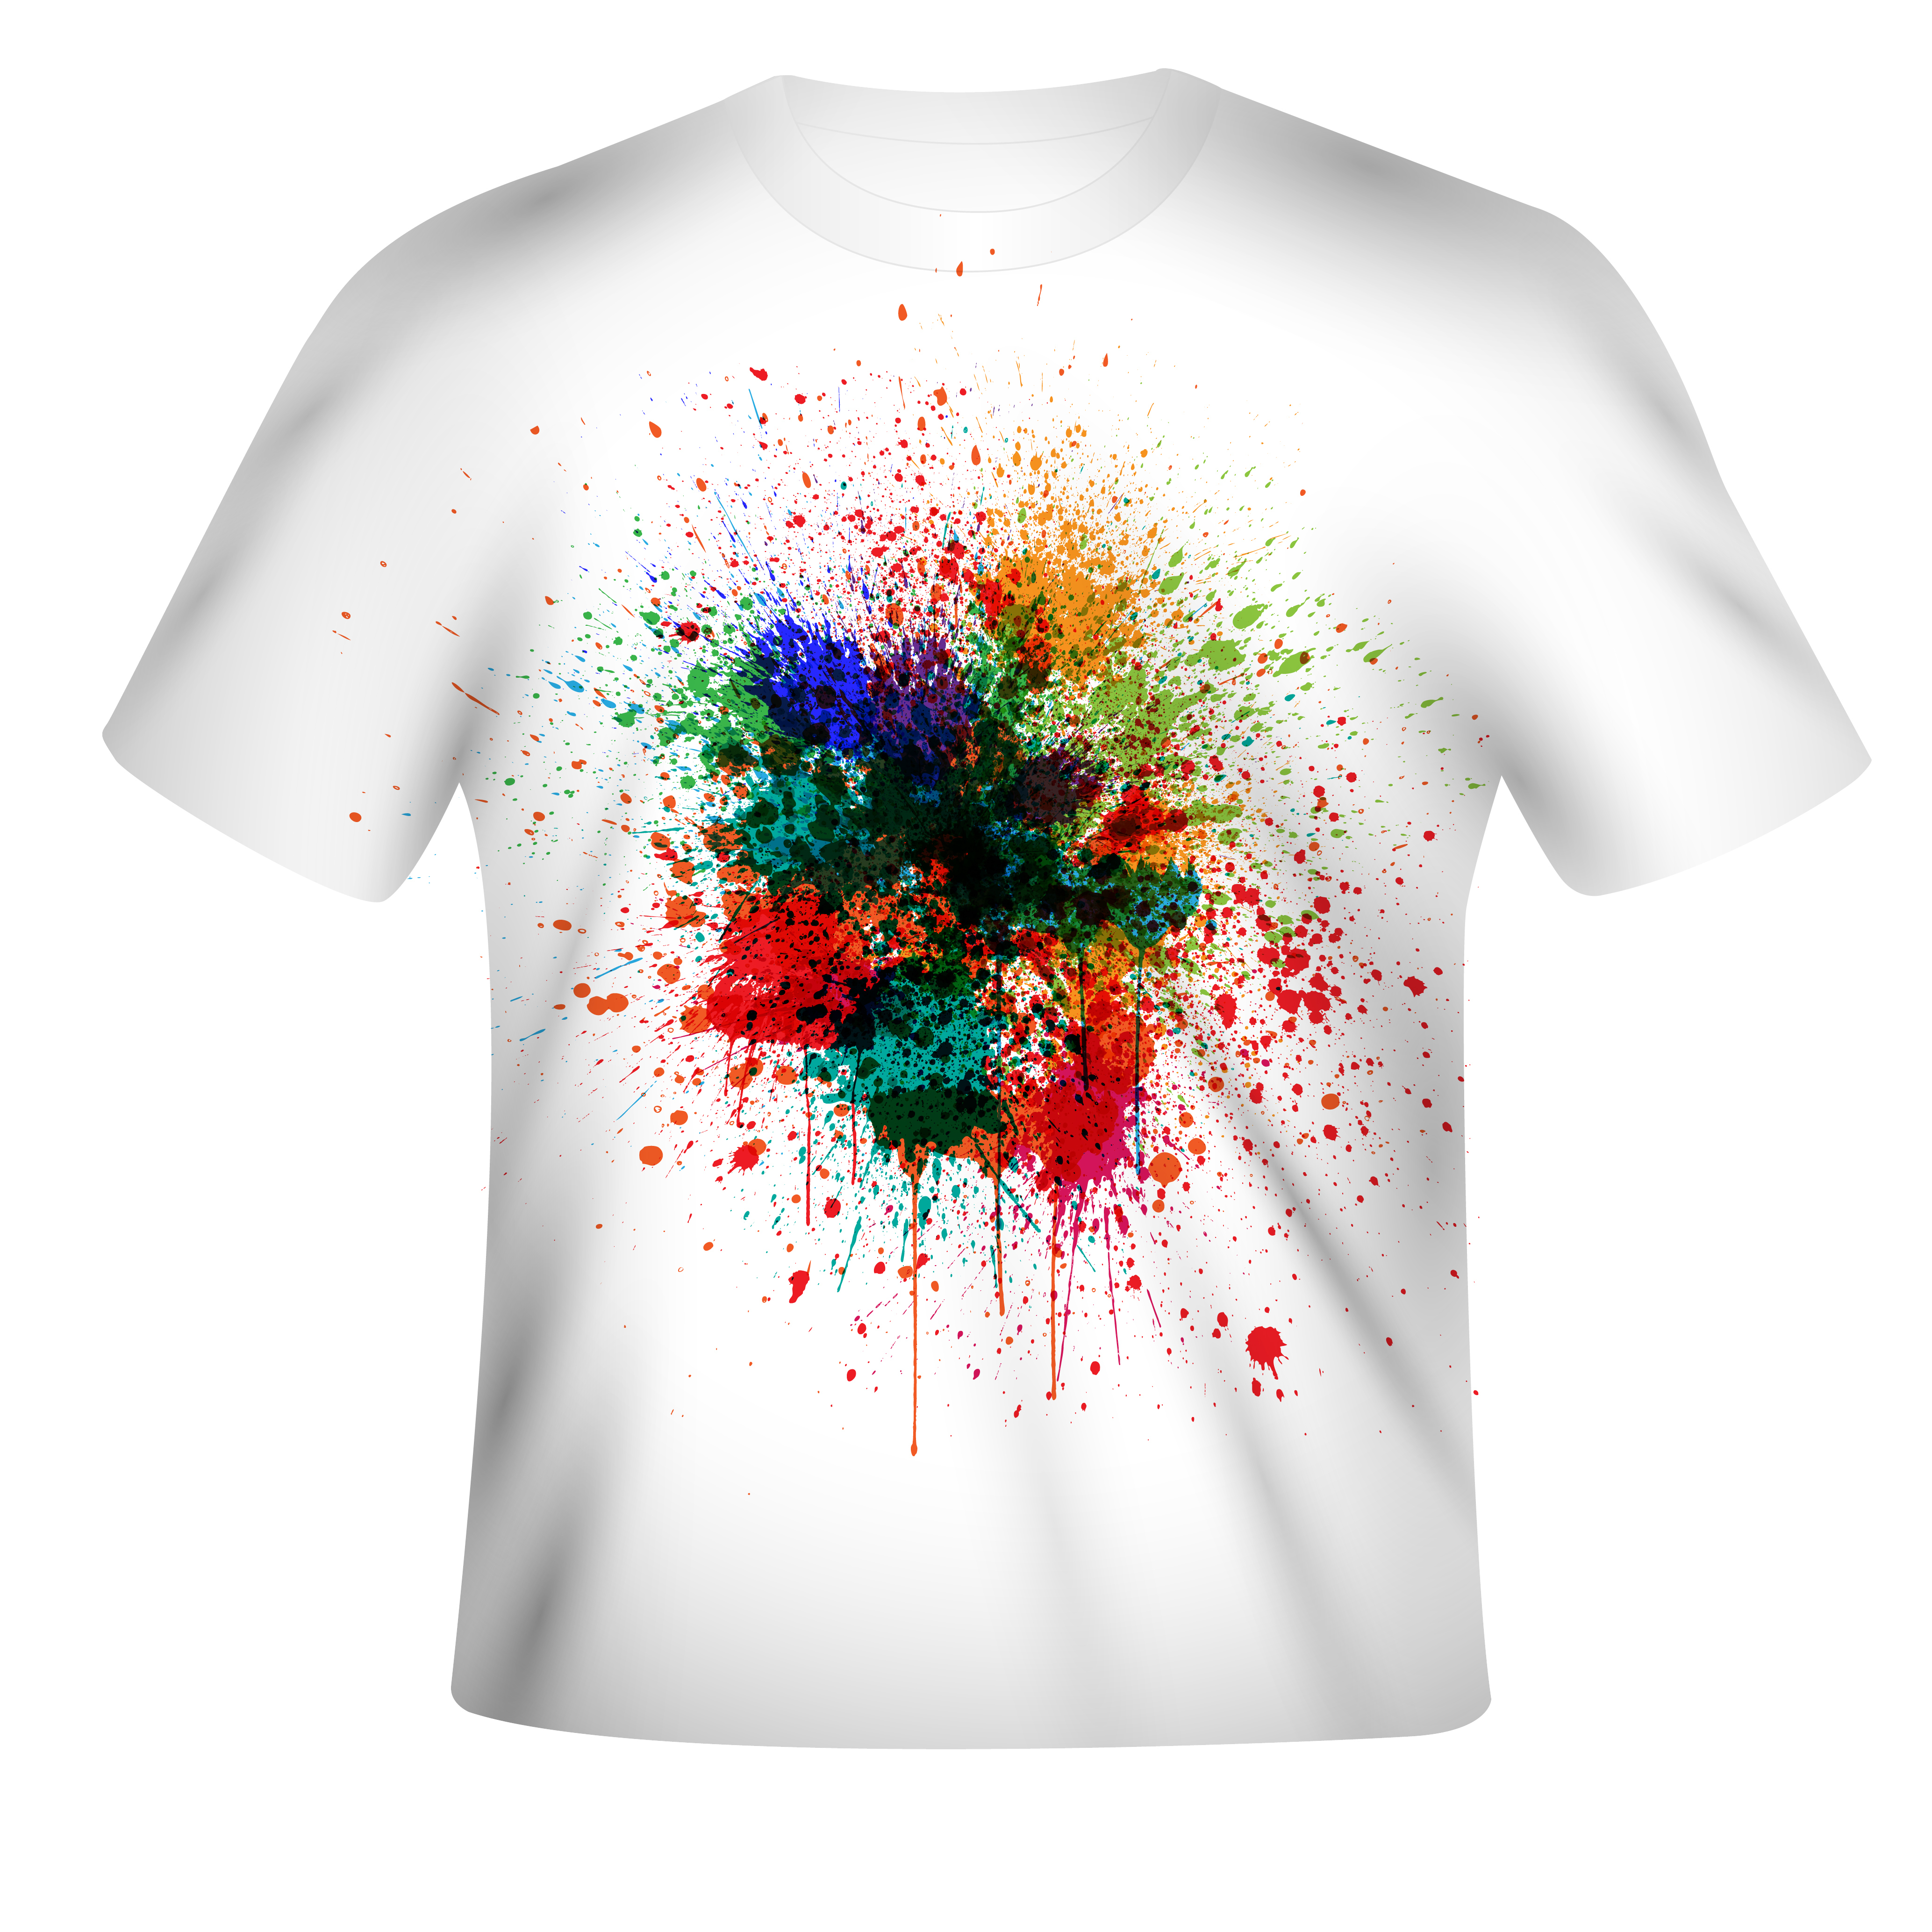 Download Vector t-shirt design with colorful design 276132 Vector ...